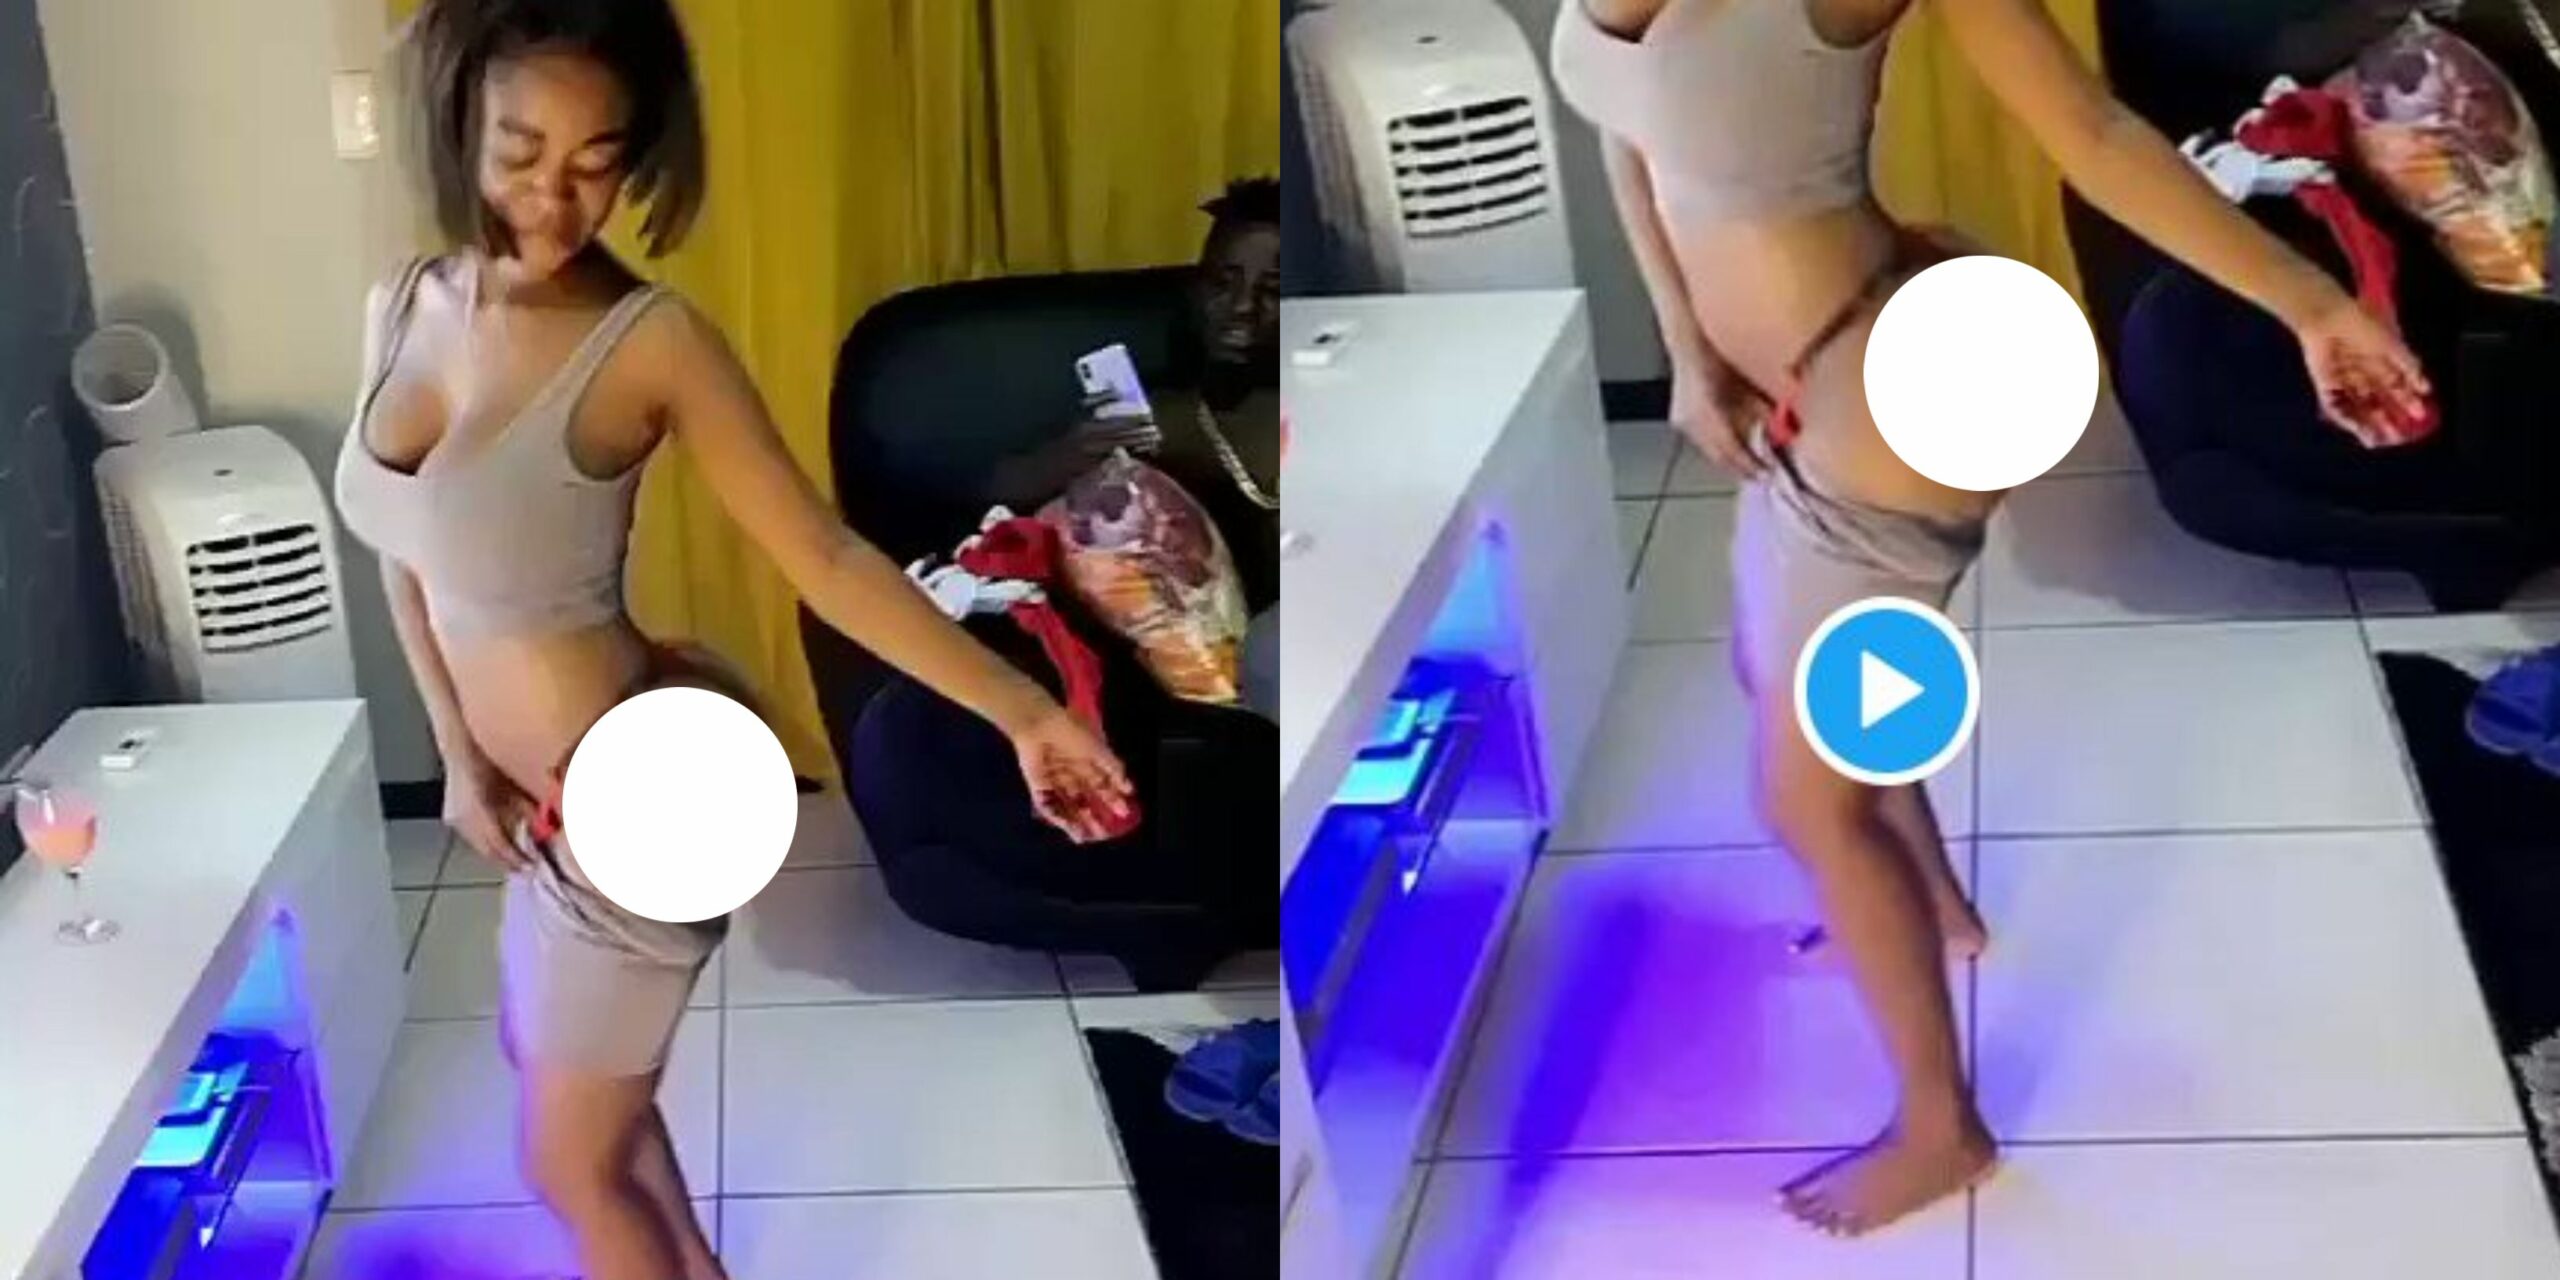 South Africans call for Nigerians exit from their country as video of SA lady dancing n_ked in front